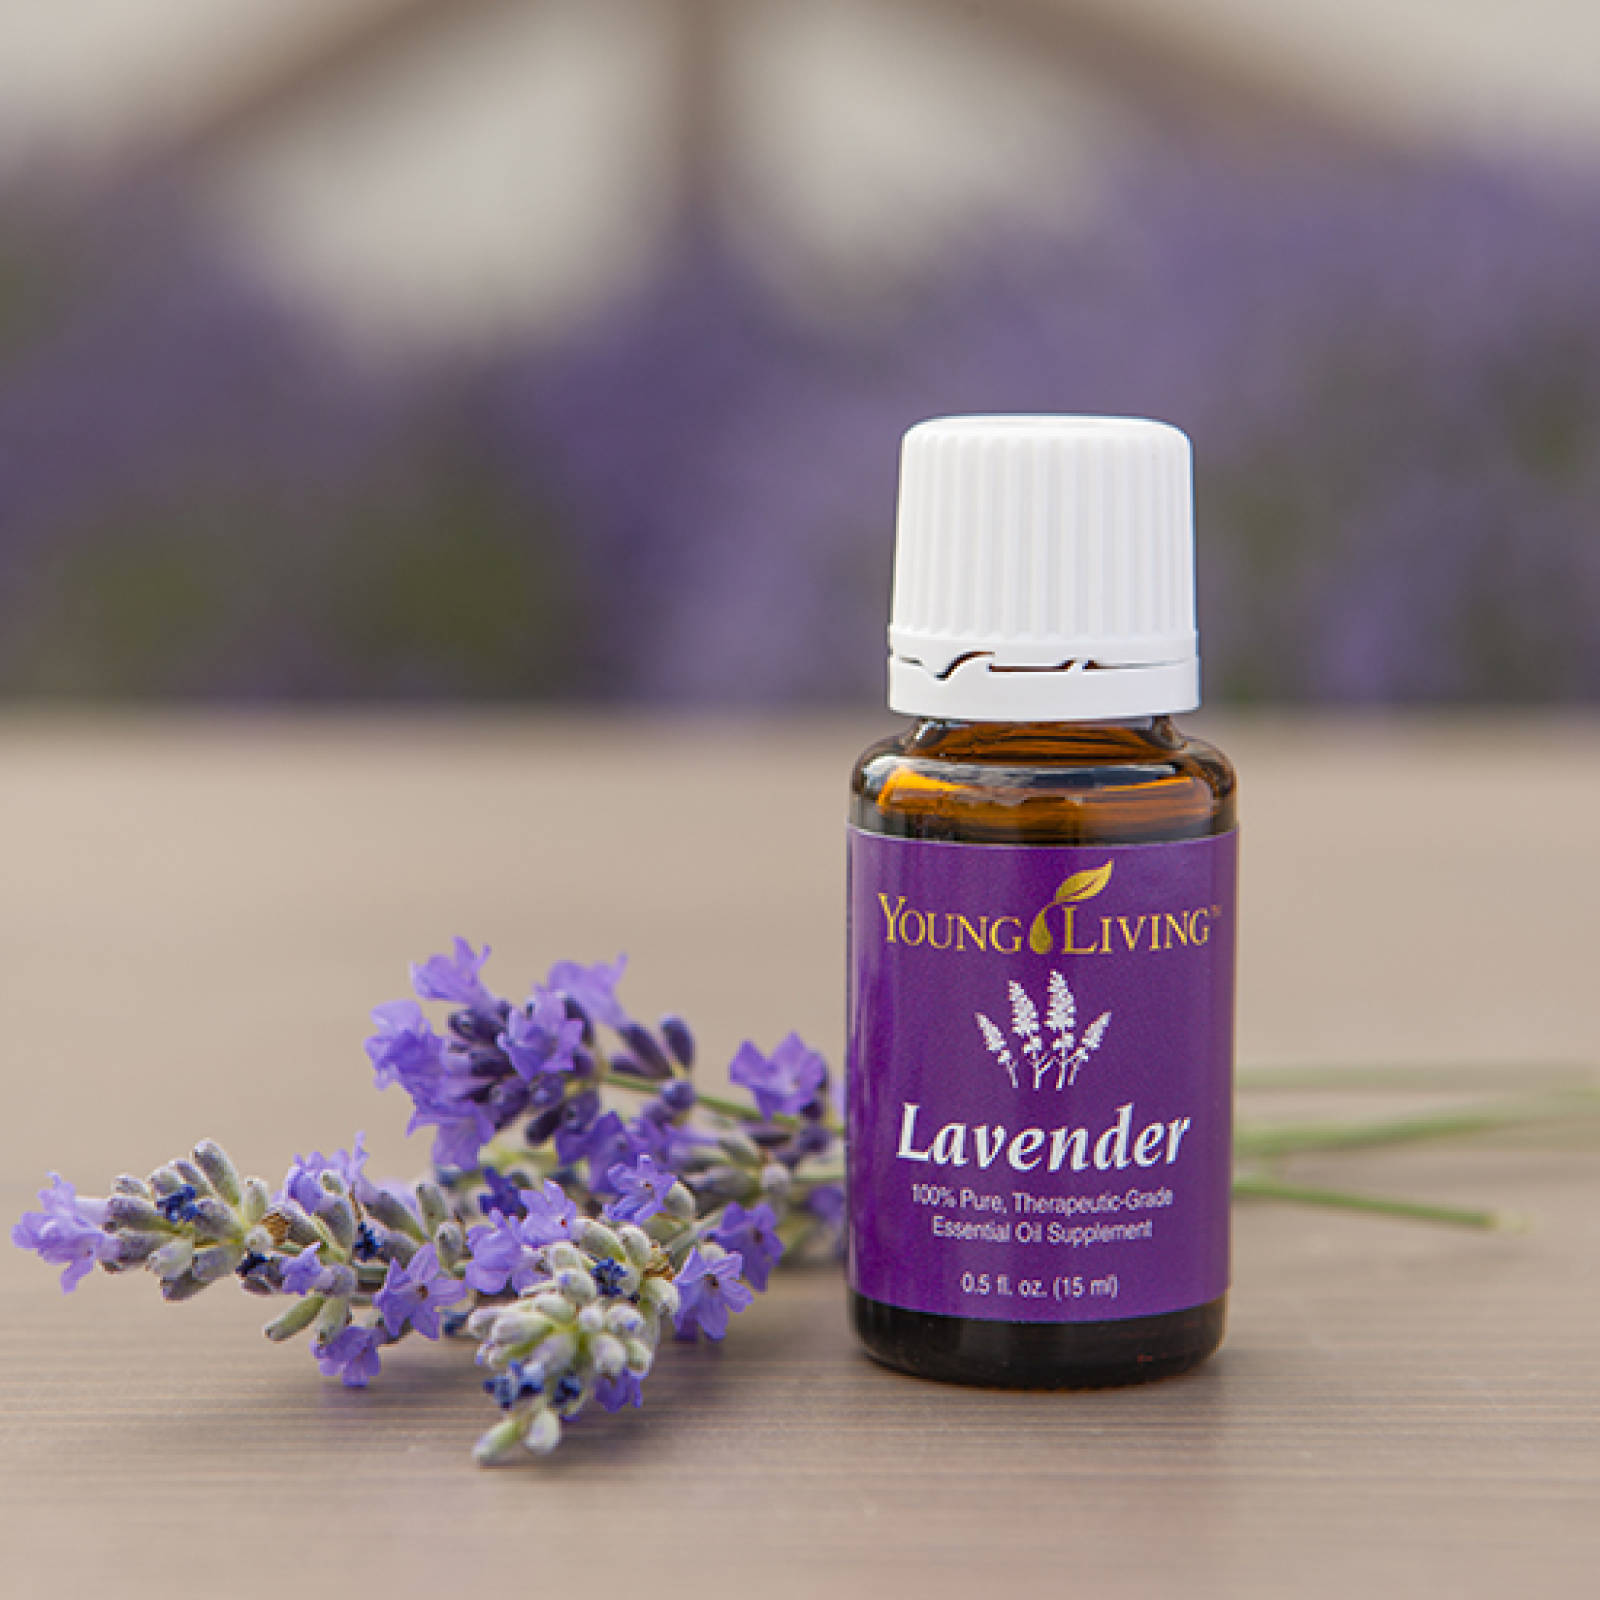 Natures Therapeutic Solutions including Lavender